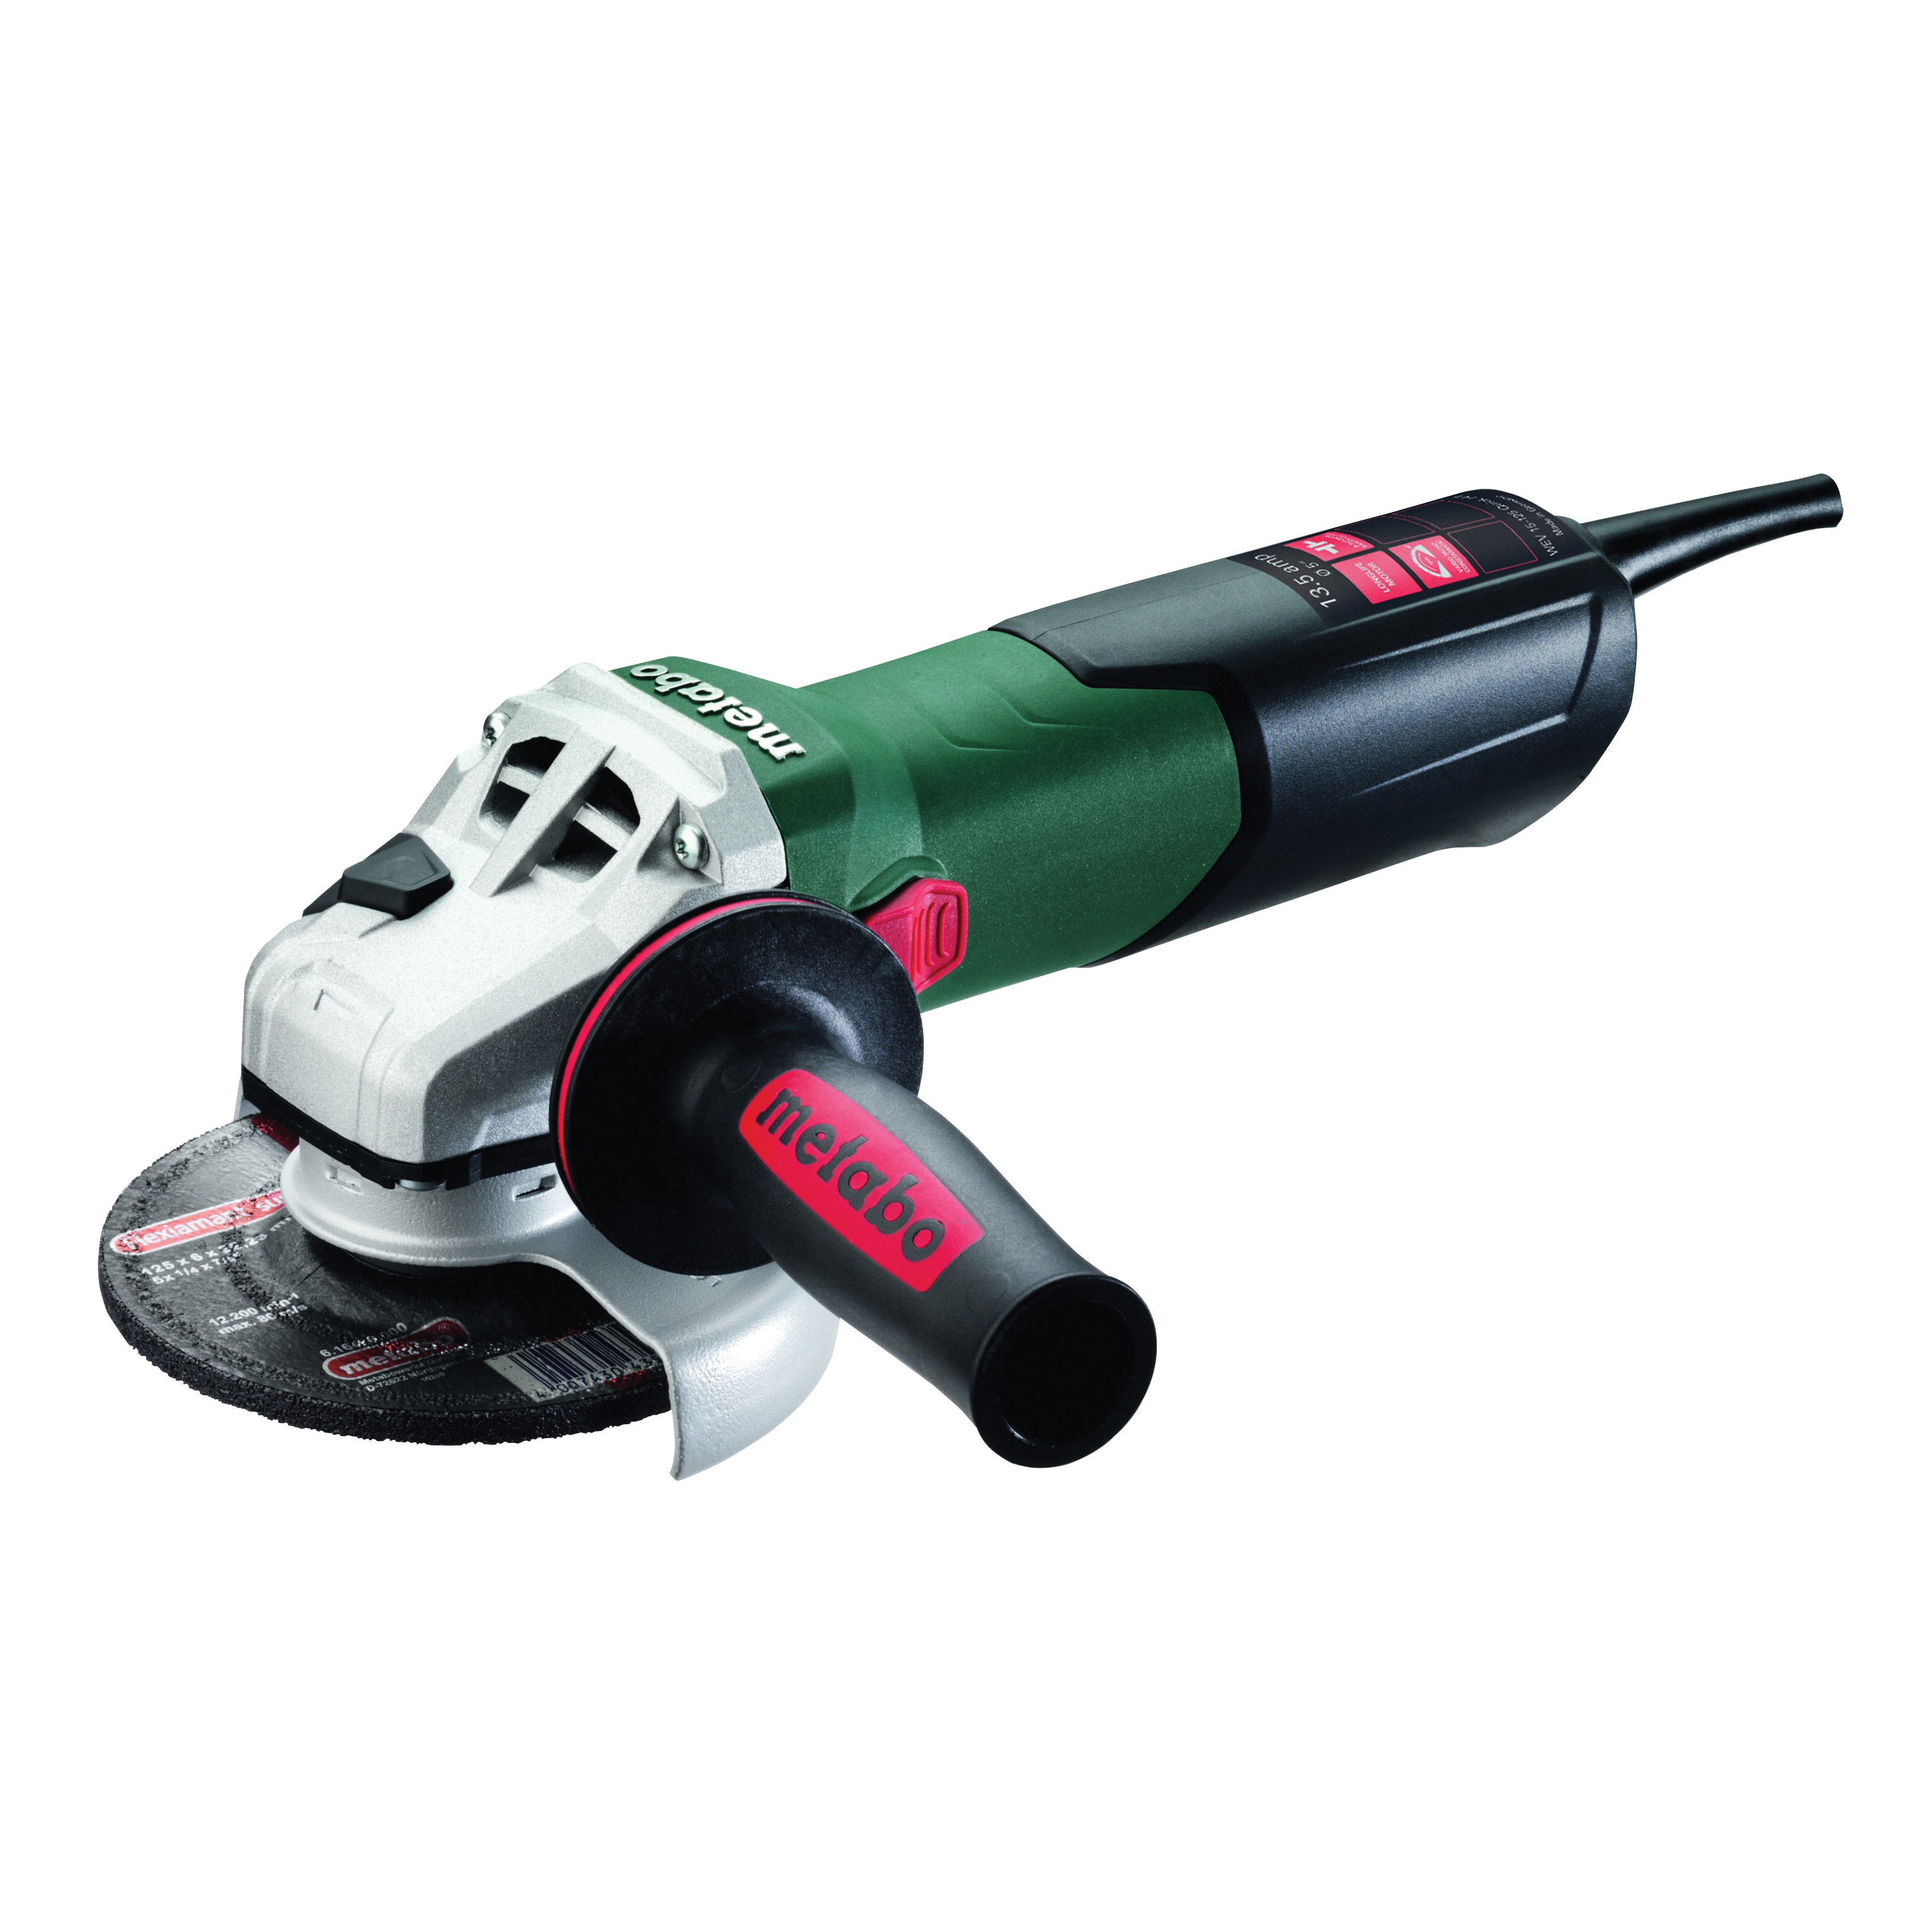 metabo® 600552420 Electric Angle Grinder, 6 in Dia Wheel, 5/8-11 UNC Arbor/Shank, 110 to 120 VAC